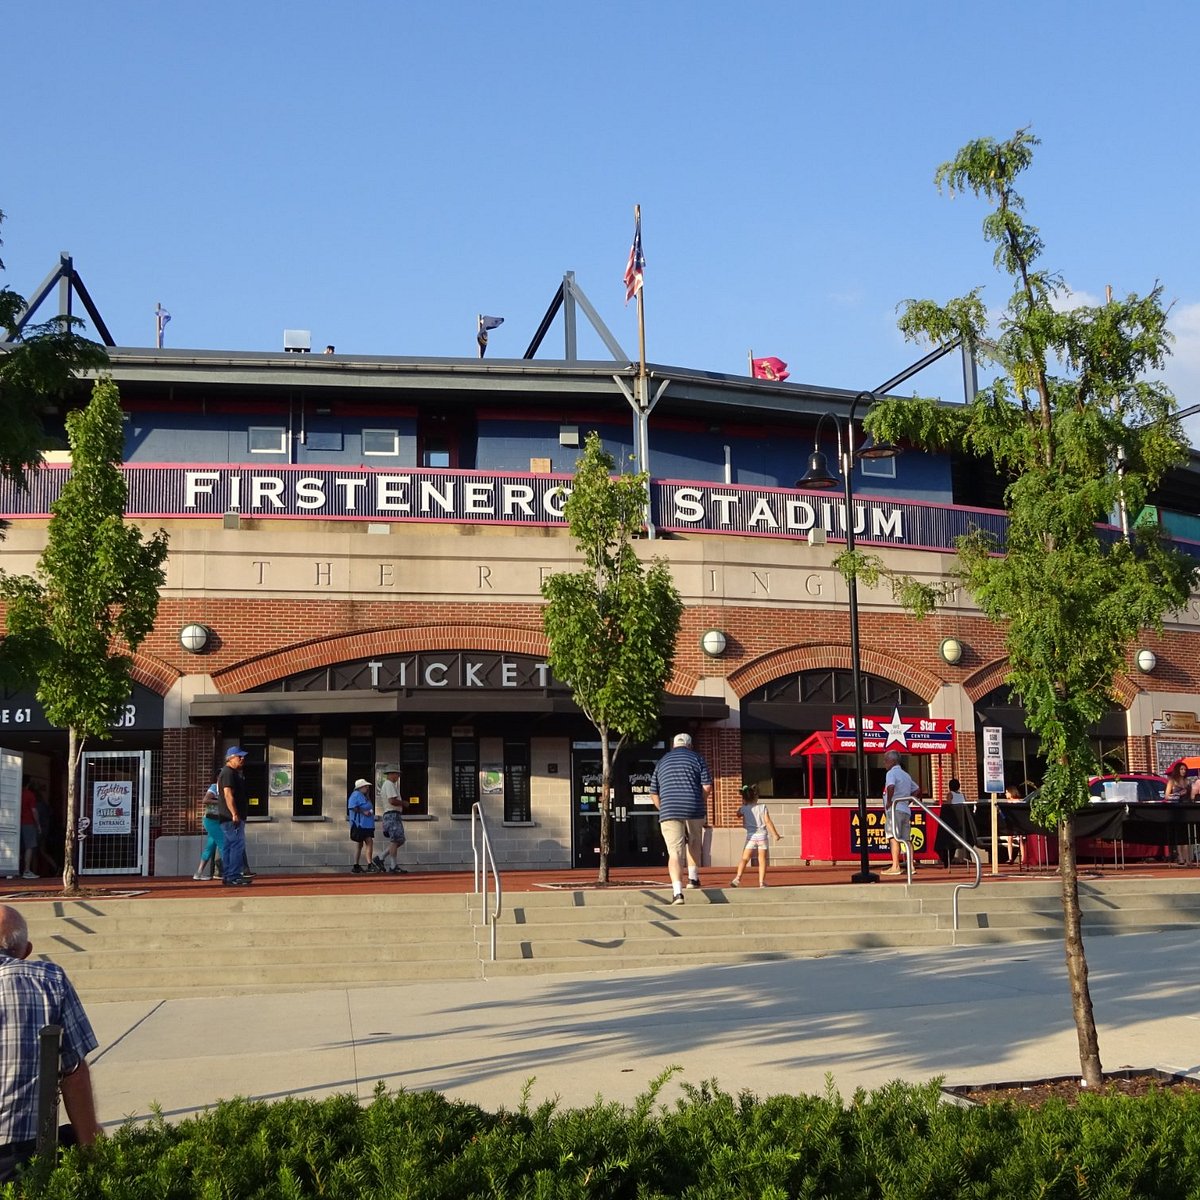 11 Best Things About Going to A Reading Fightin Phils Game